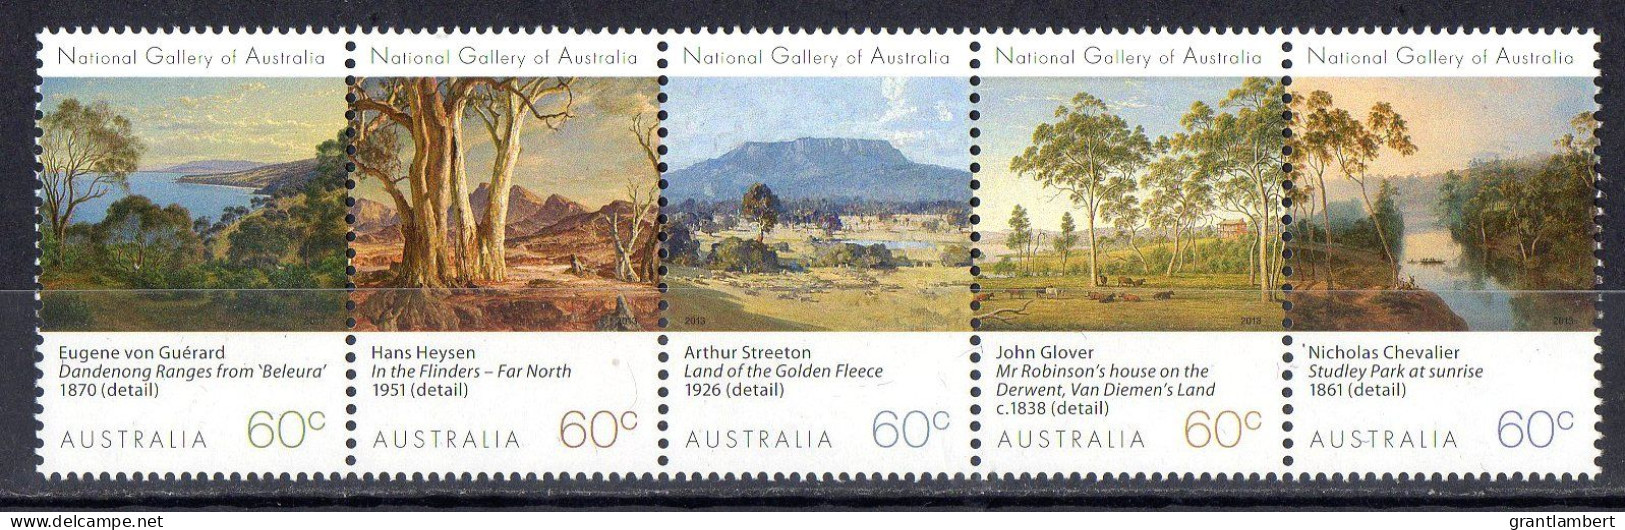 Australia 2013 National Gallery Landscapes  Set As Strip Of 5 MNH - Mint Stamps